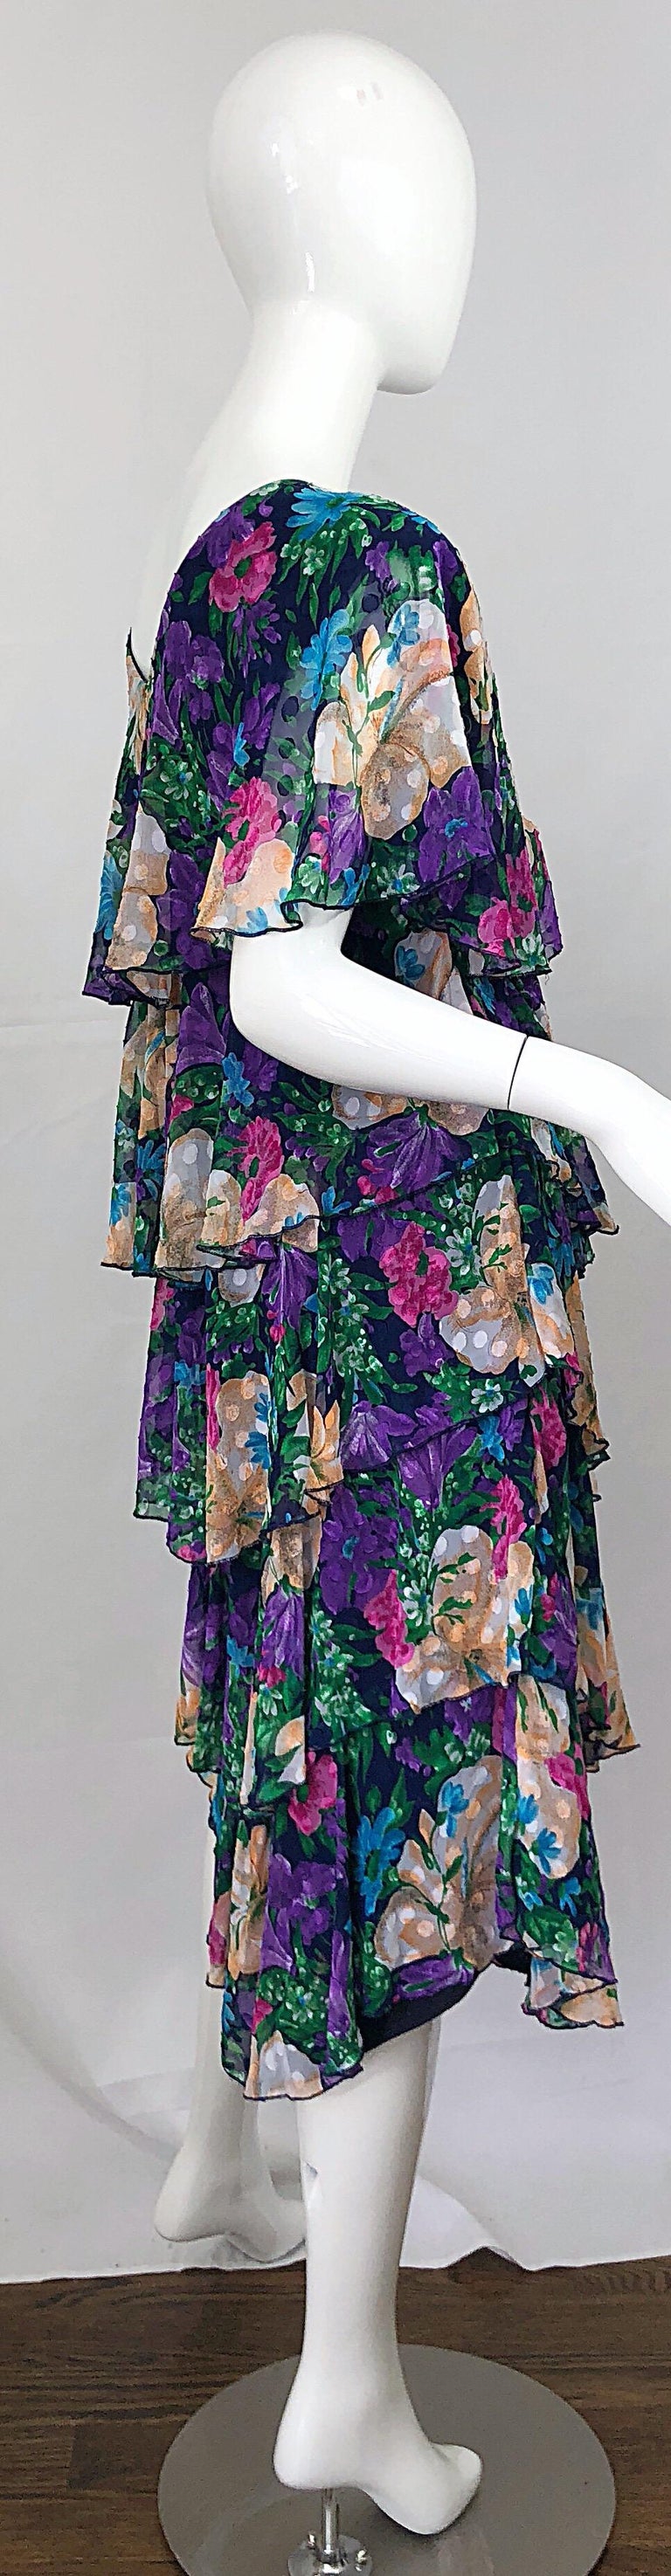 Vintage Justin David Flapper Style Large Size 1980s Chiffon Floral 80s Dress For Sale at 1stdibs